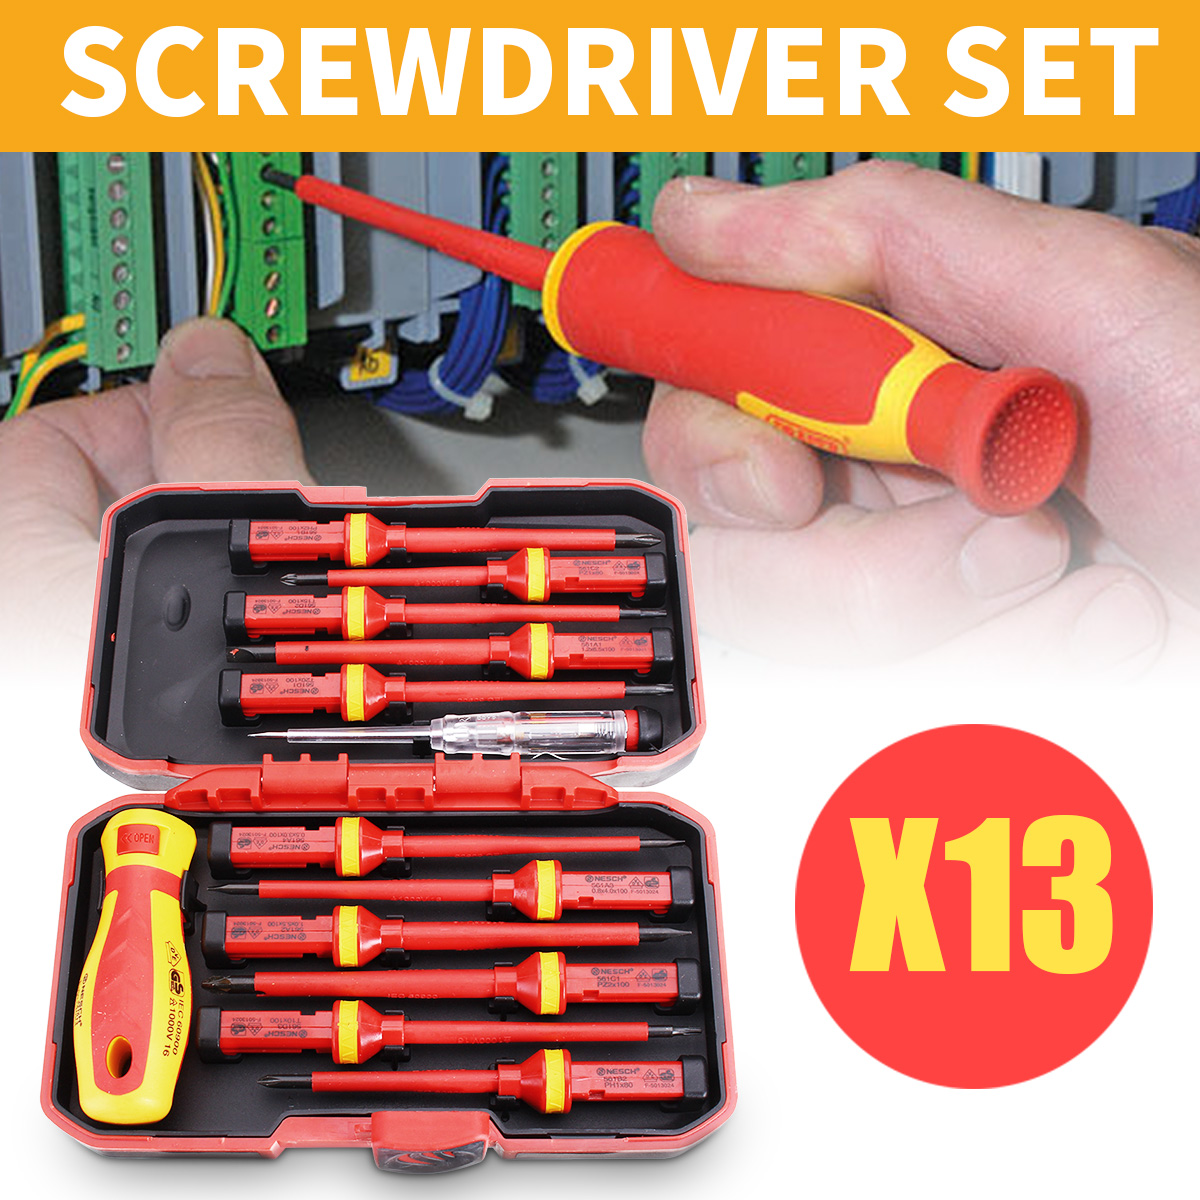 13Pcs-1000V-Electronic-Insulated-Screwdriver-Set-Phillips-Slotted-Torx-CR-V-Screwdriver-Hand-Tools-1224521-1